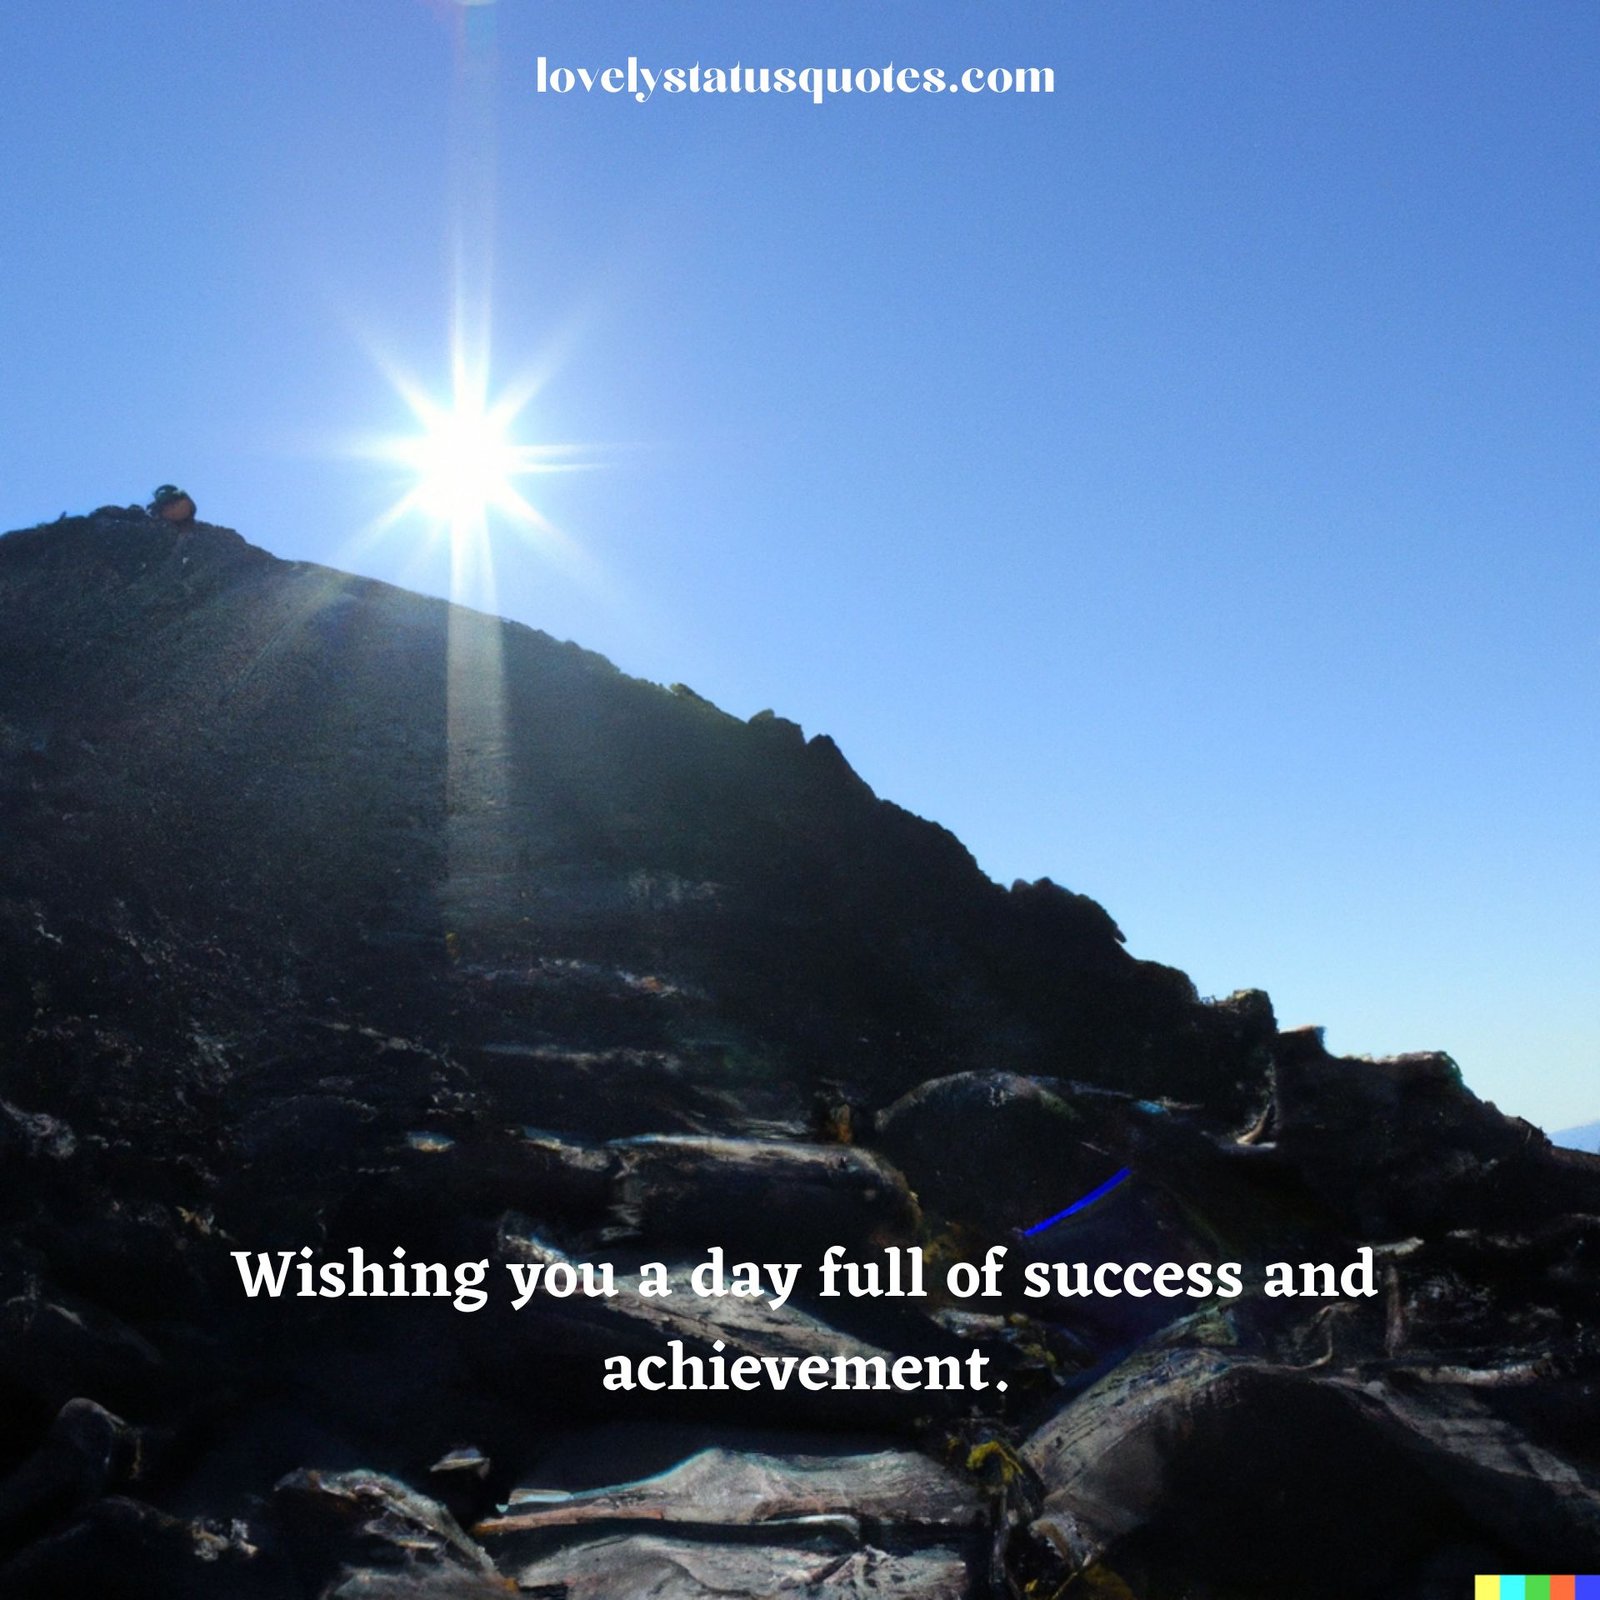 wishing you a day full of success and achievement